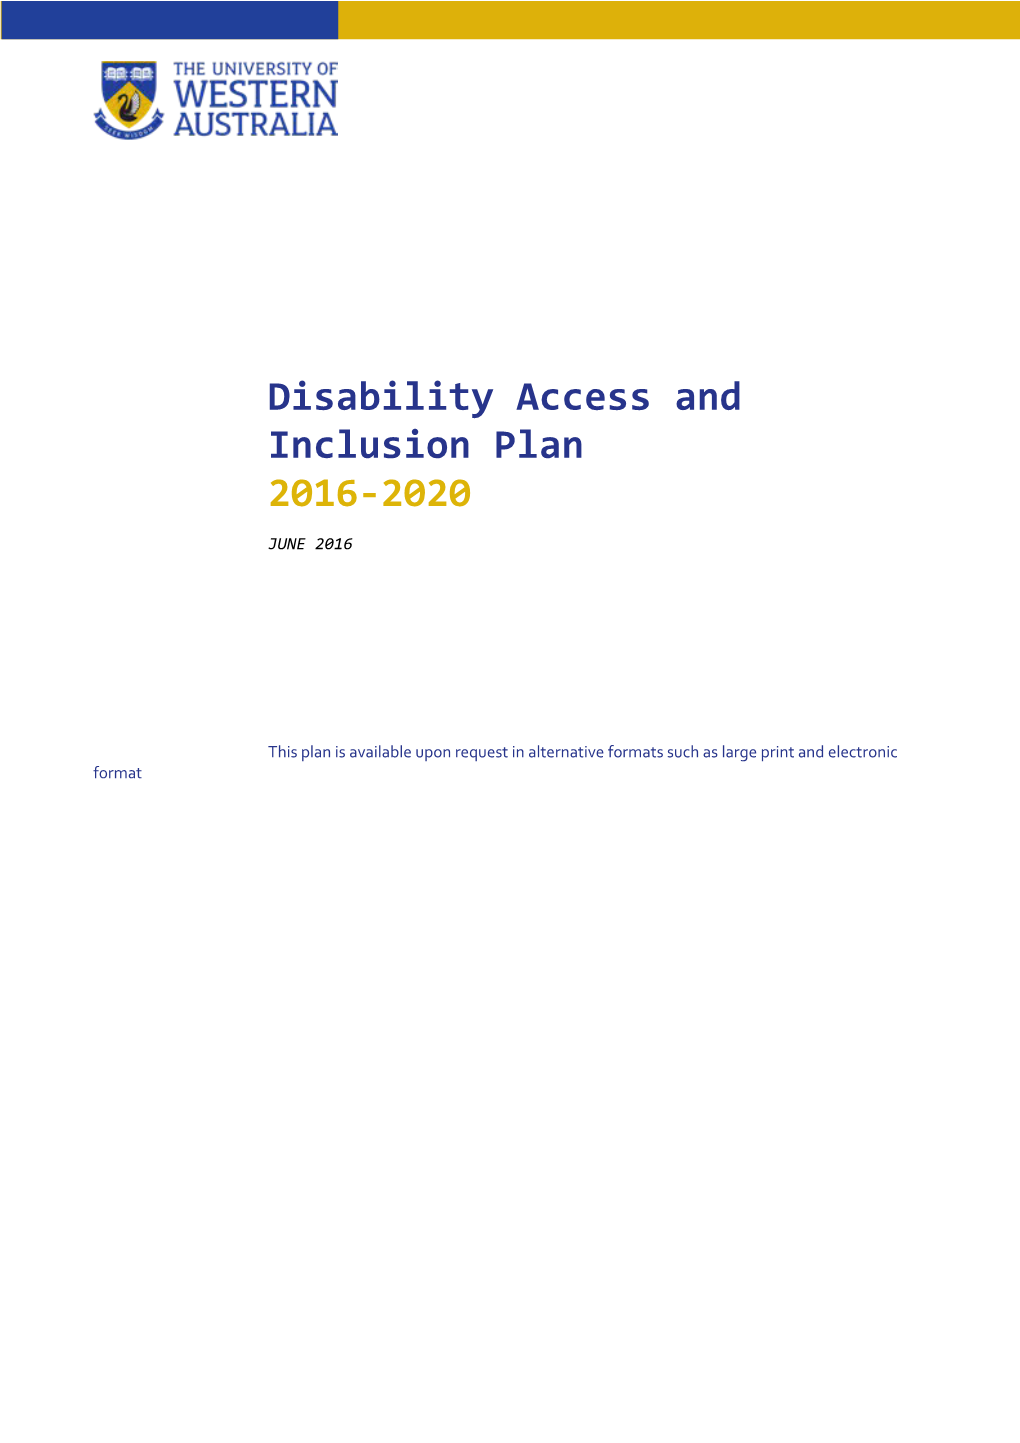 Disability Access and Inclusion Plan s1